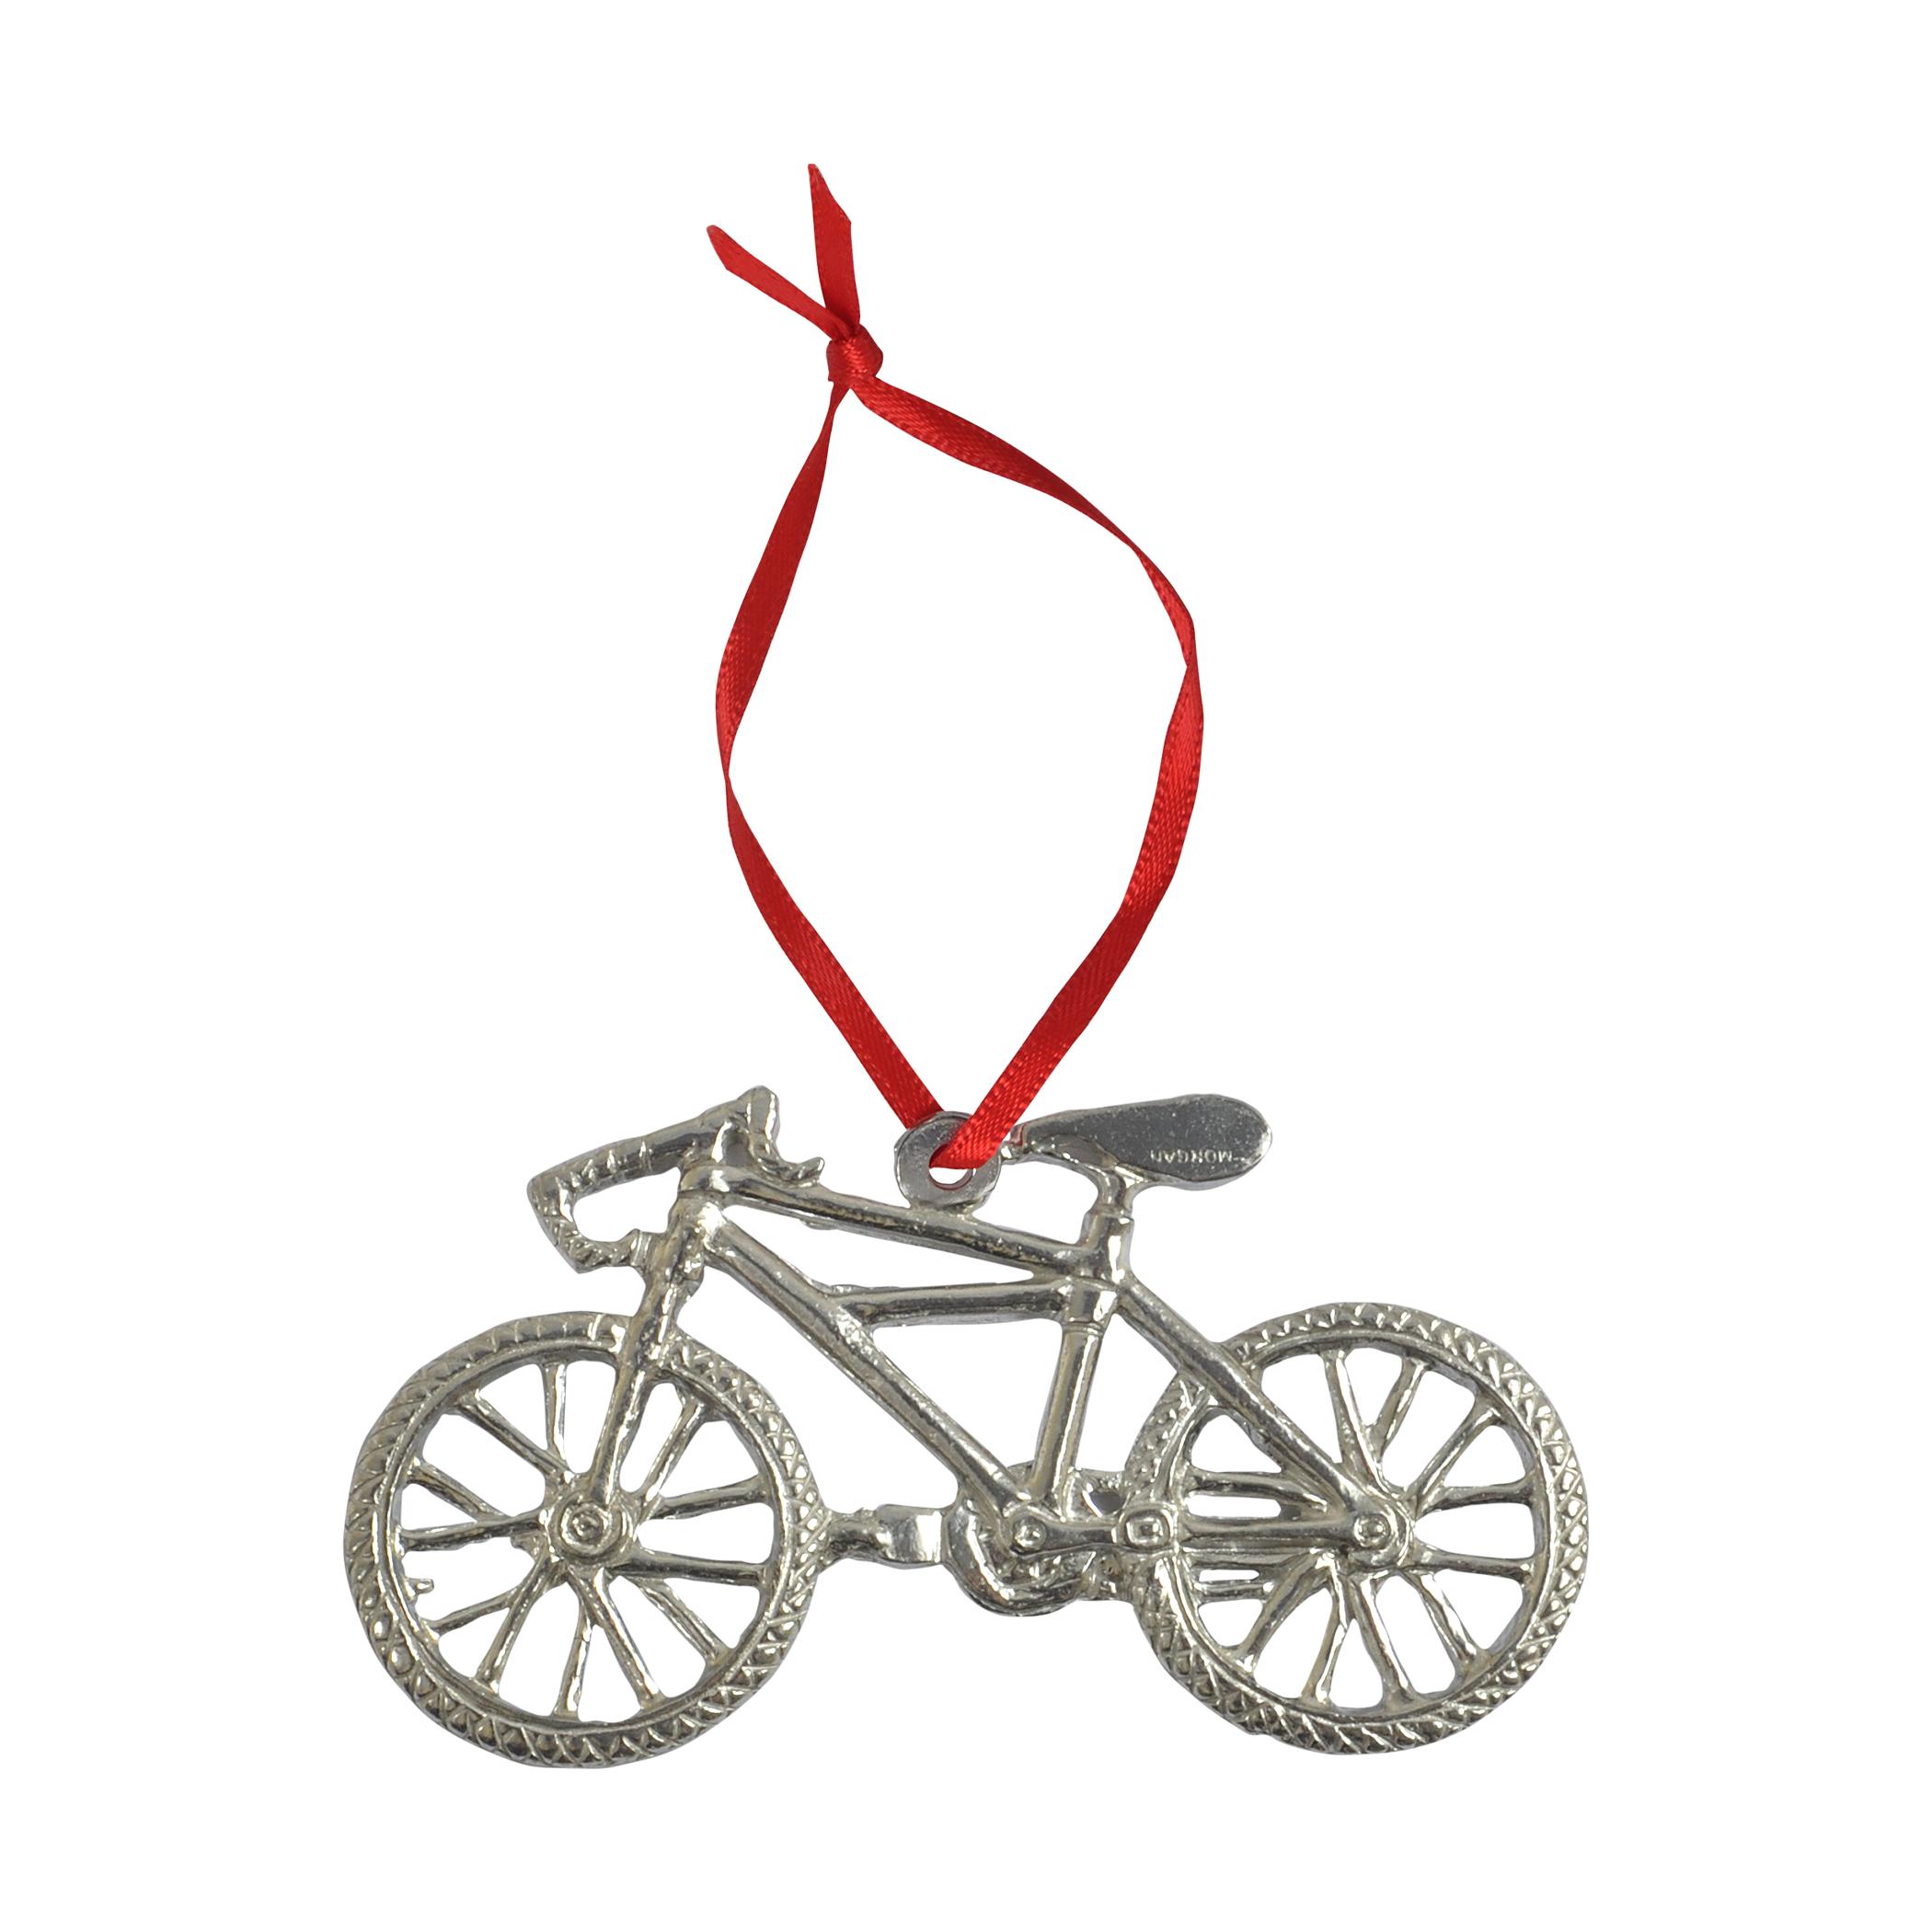  Pewter Bicycle Ornament